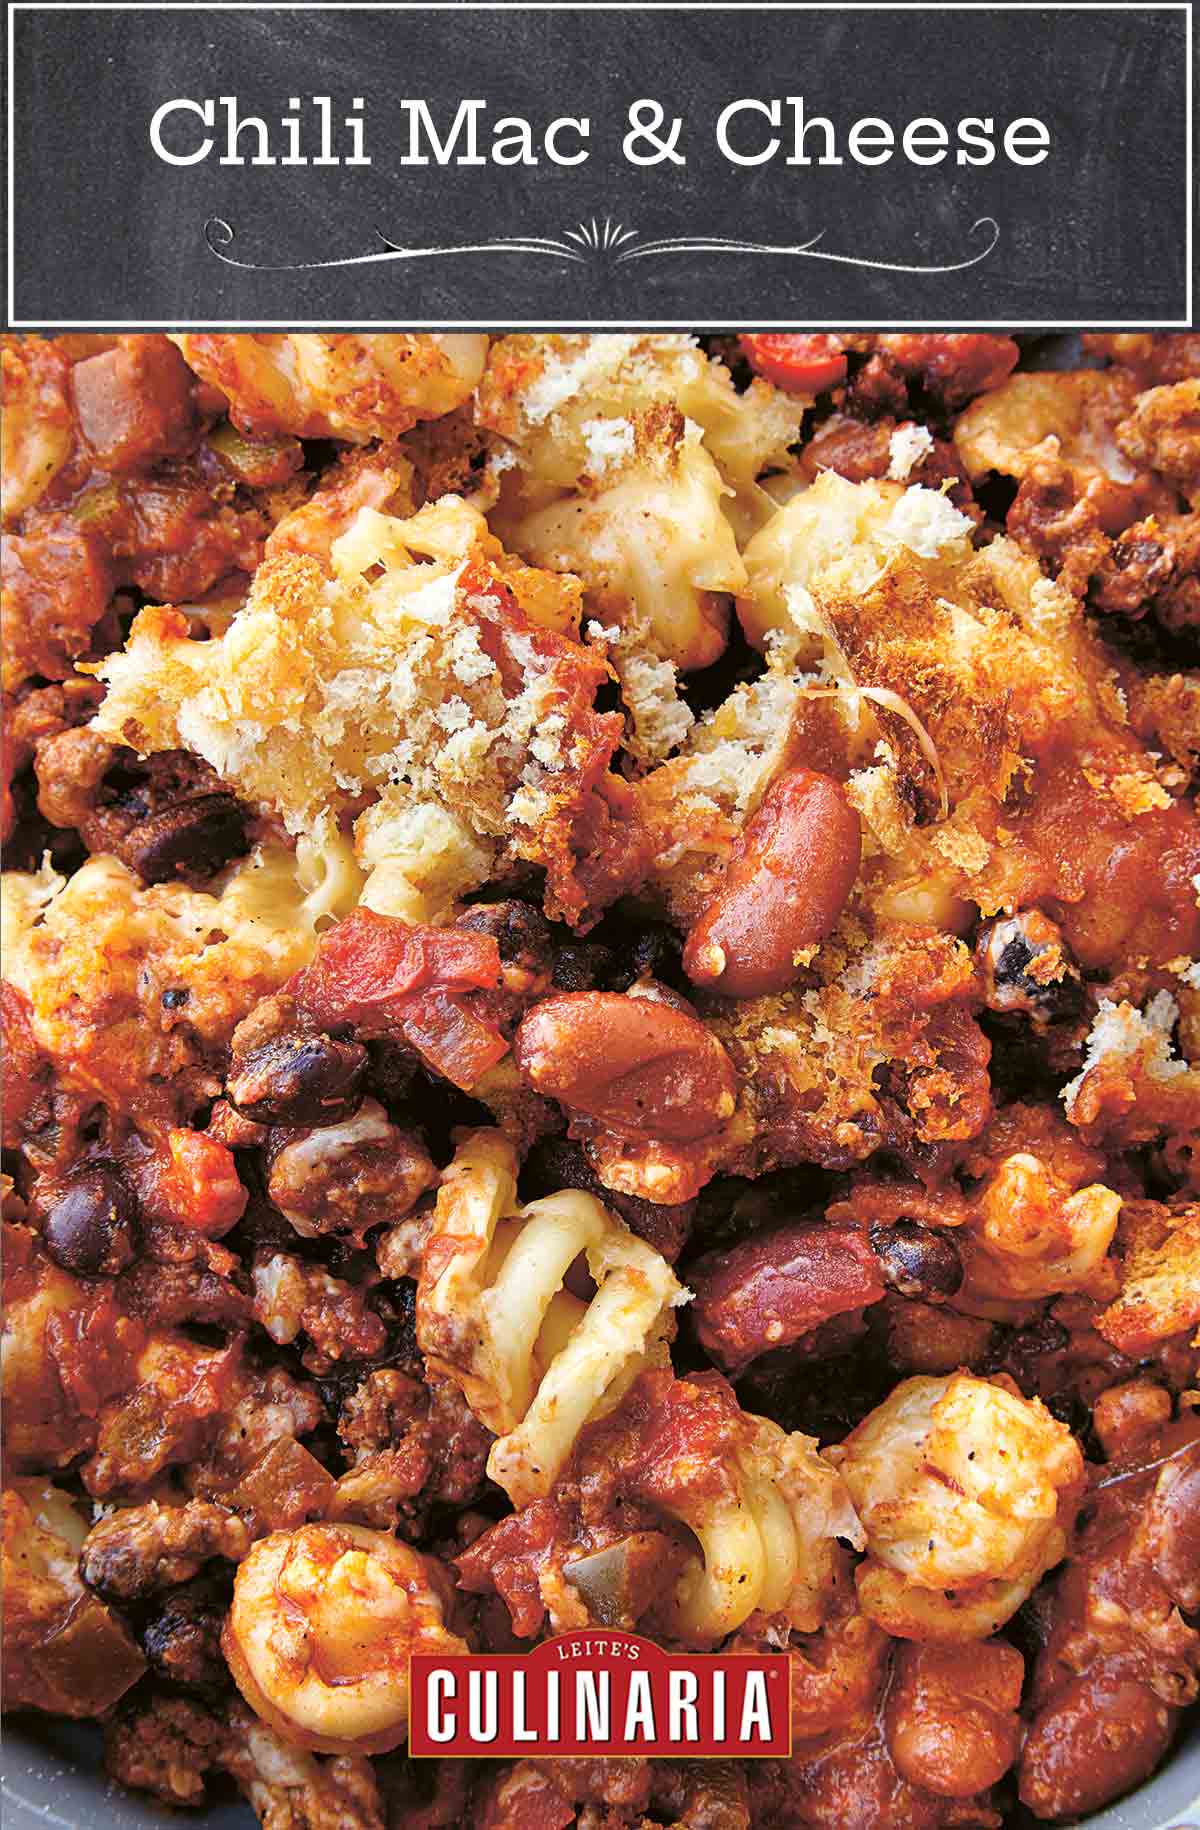 Chili mac and cheese in close-up with bread crumbs and melted cheese.